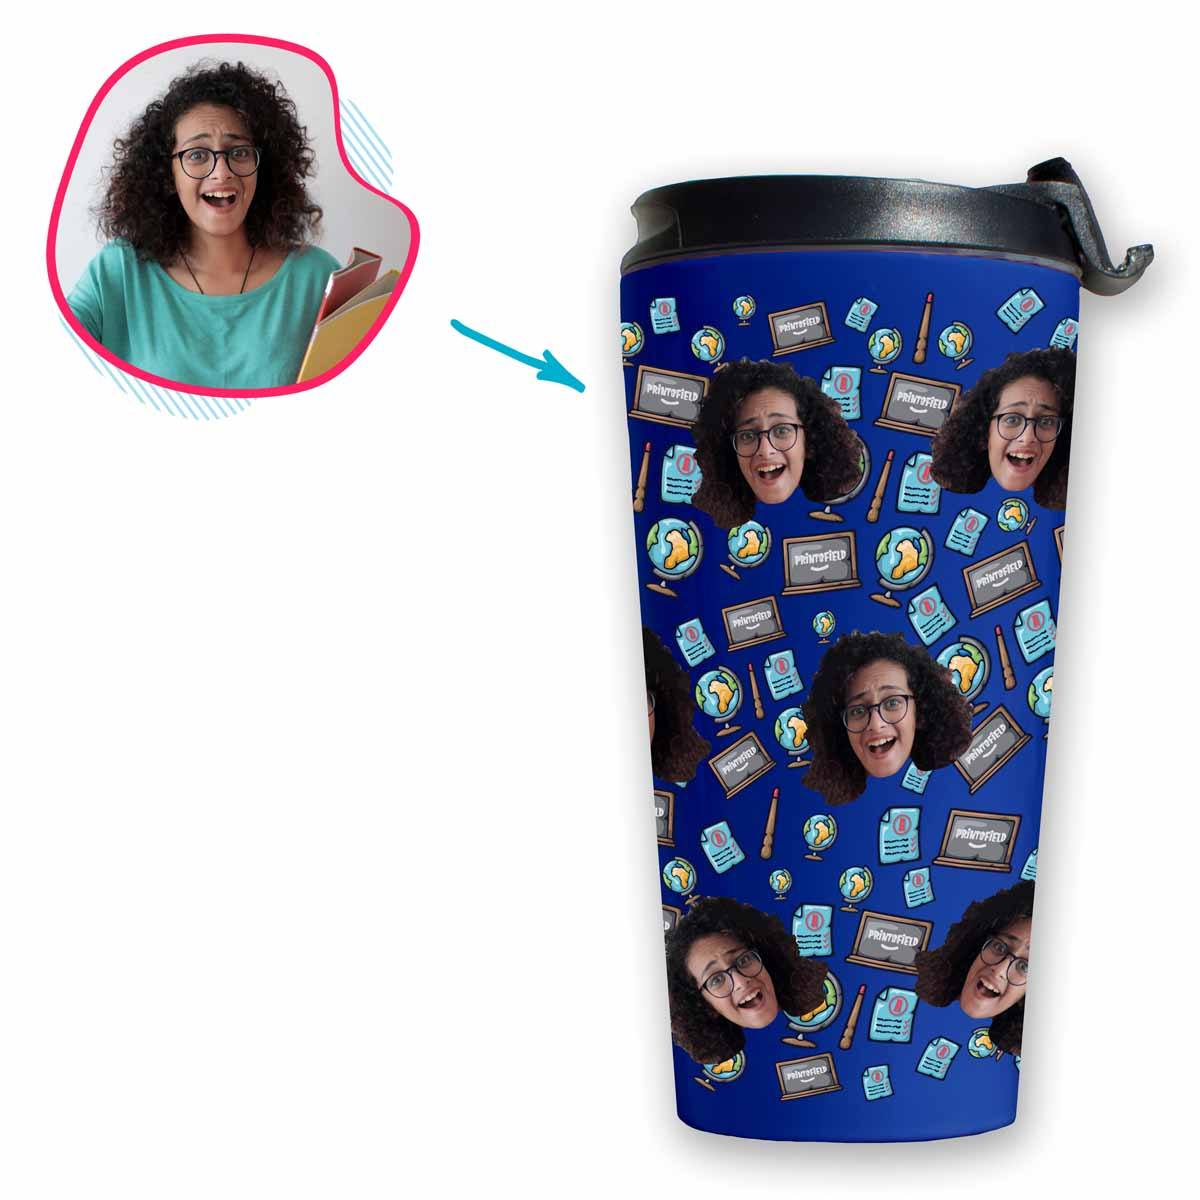 Darkblue Teacher personalized travel mug with photo of face printed on it